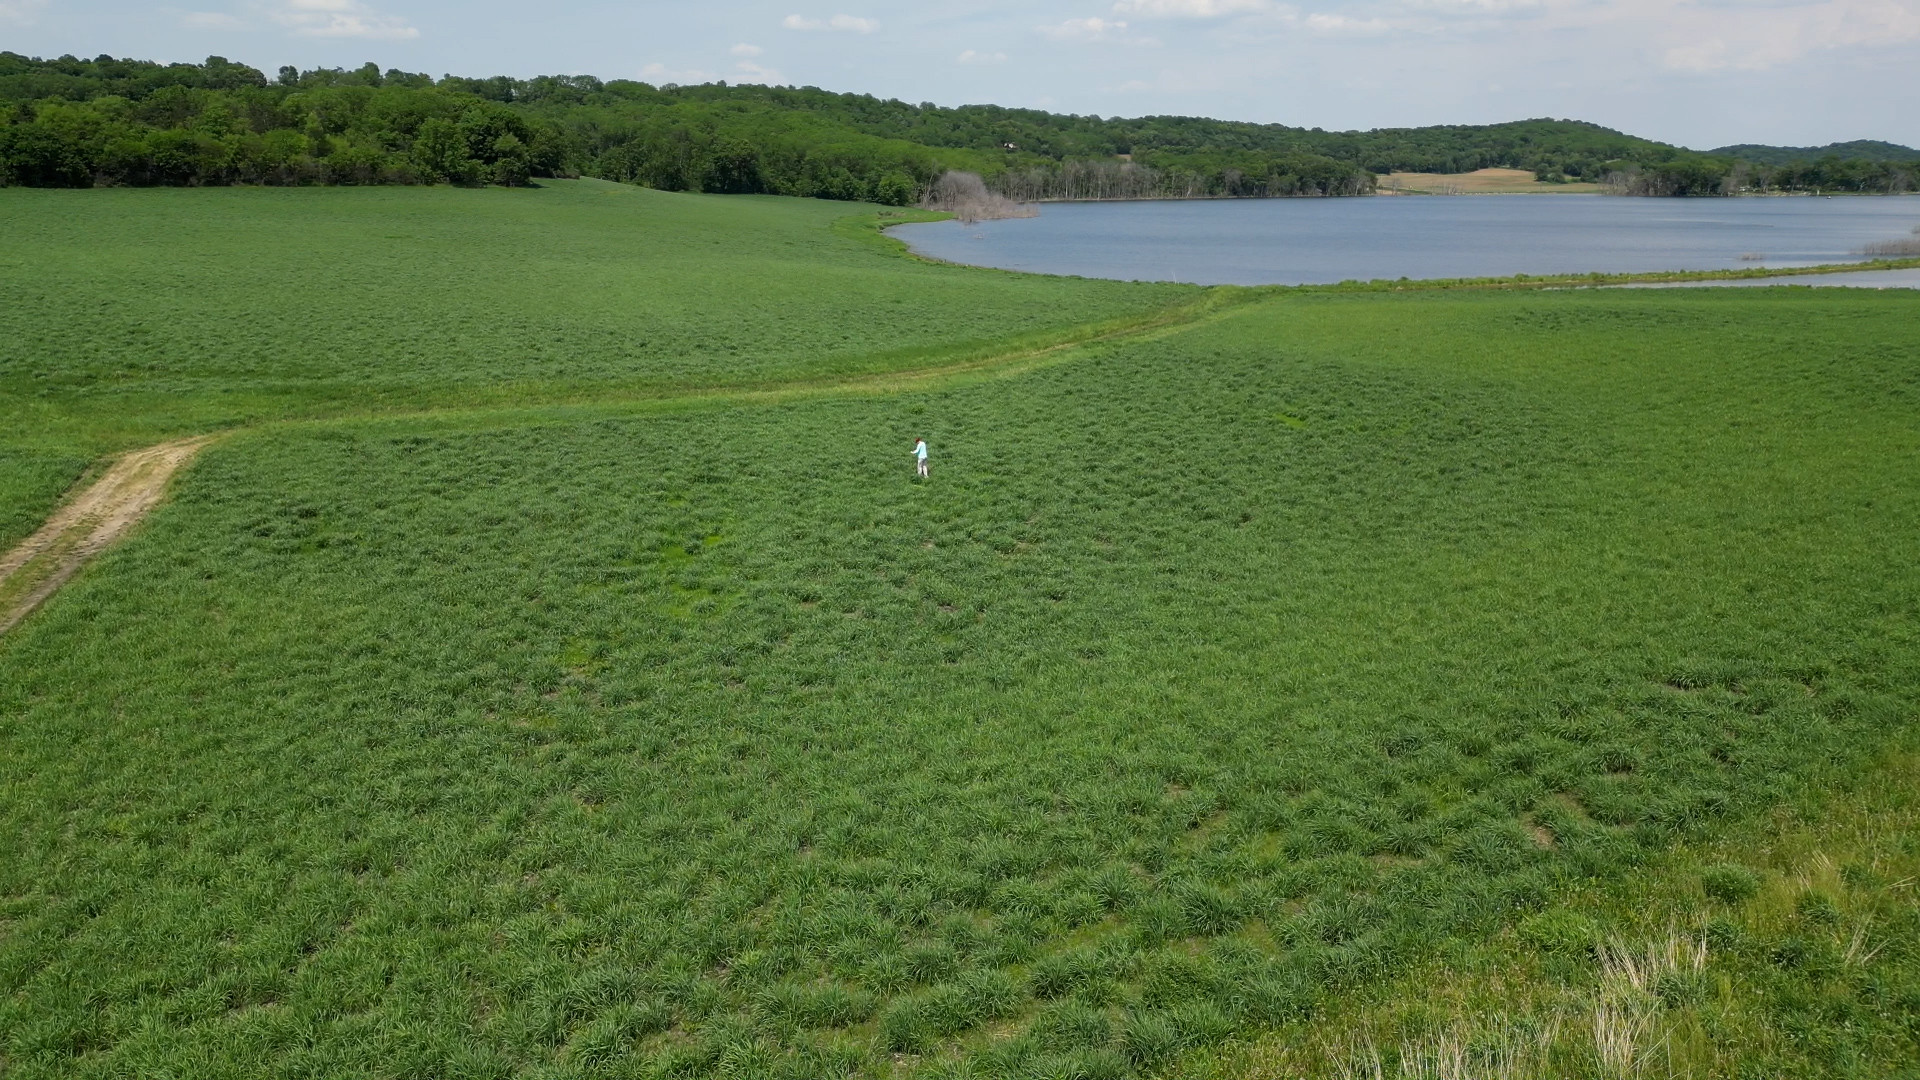 Green field with distant figure. Water in the background.